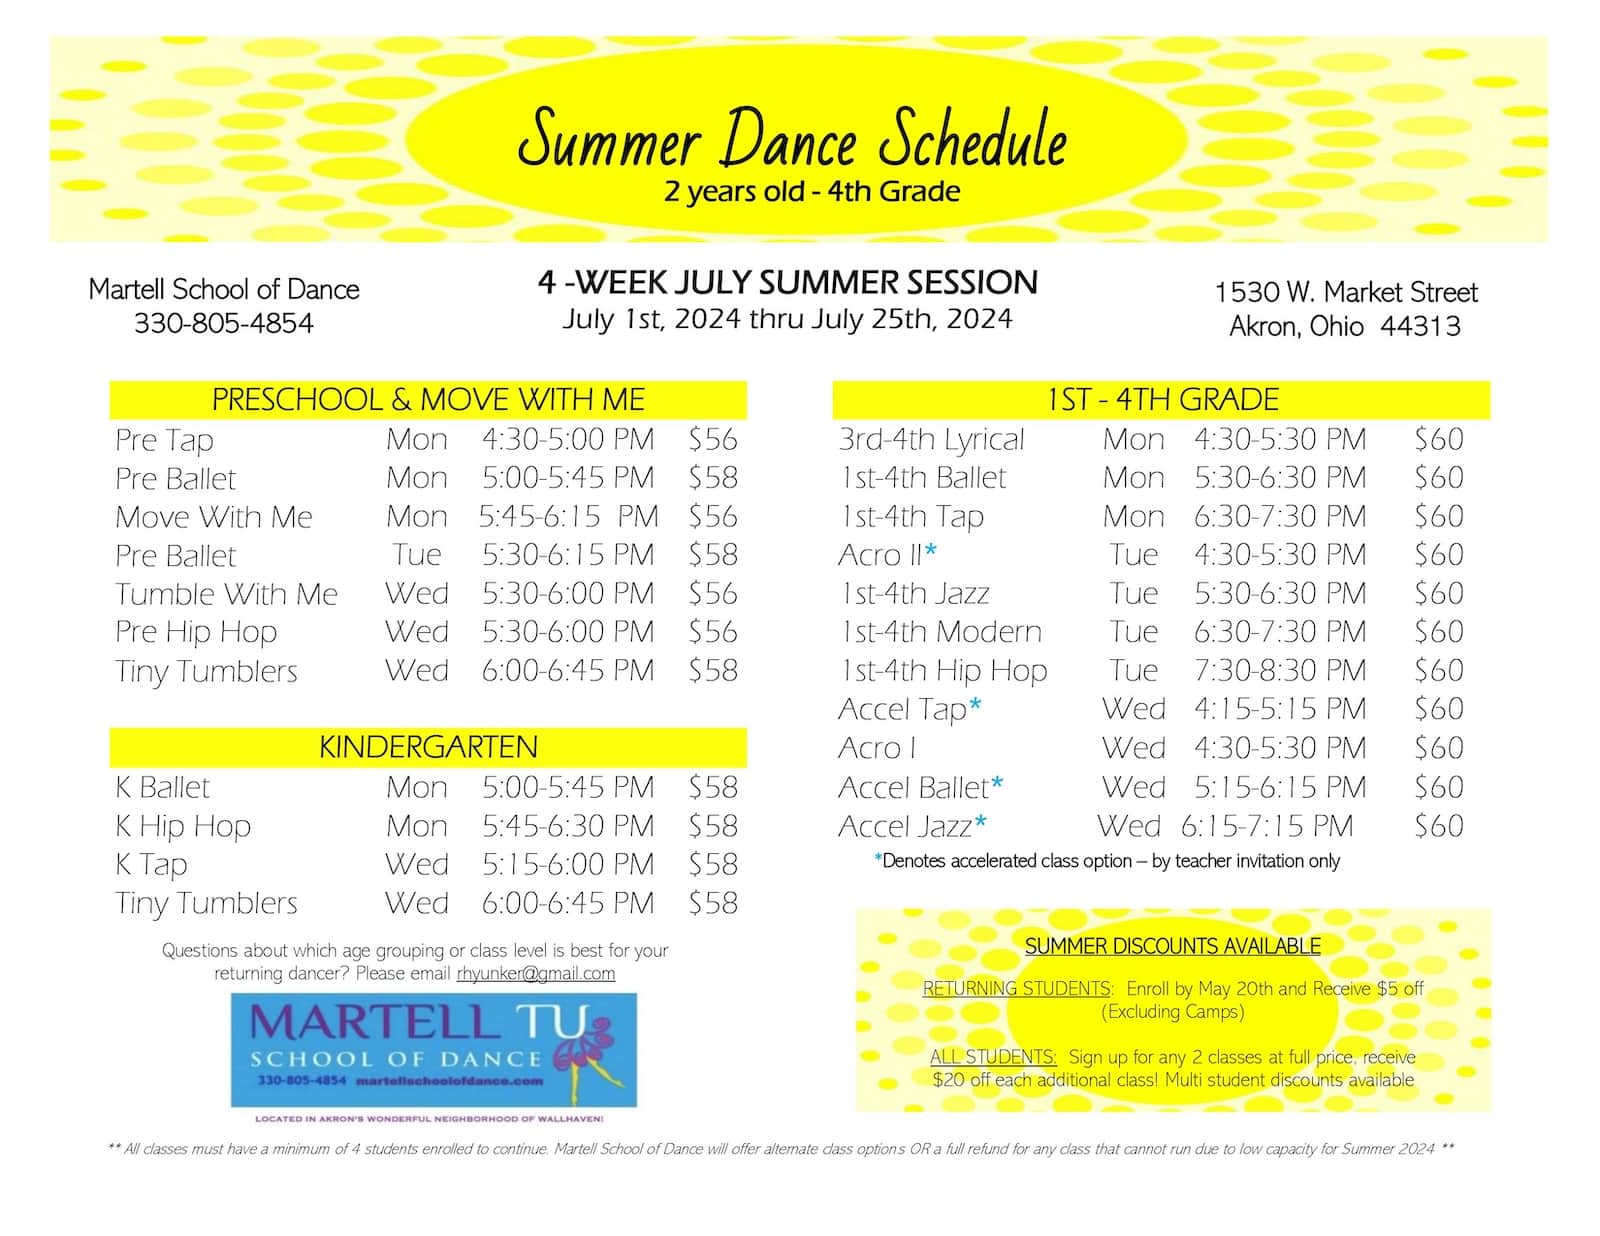 2 years old - 4th Grade summer schedule